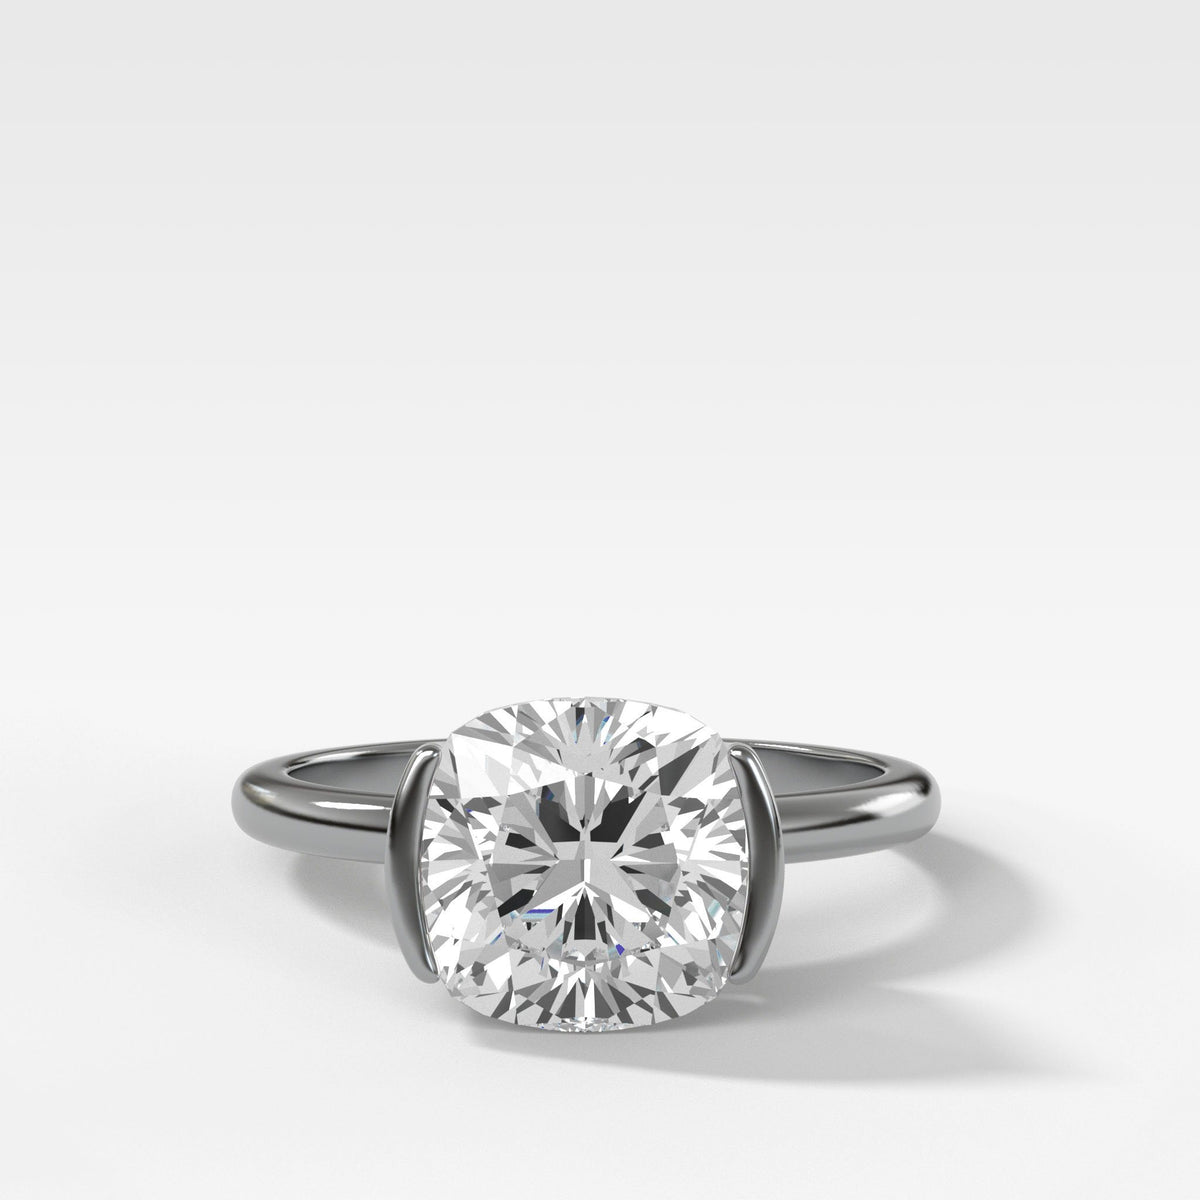 Half Bezel Solitaire Engagement Ring With Cushion Cut by Good Stone in White Gold